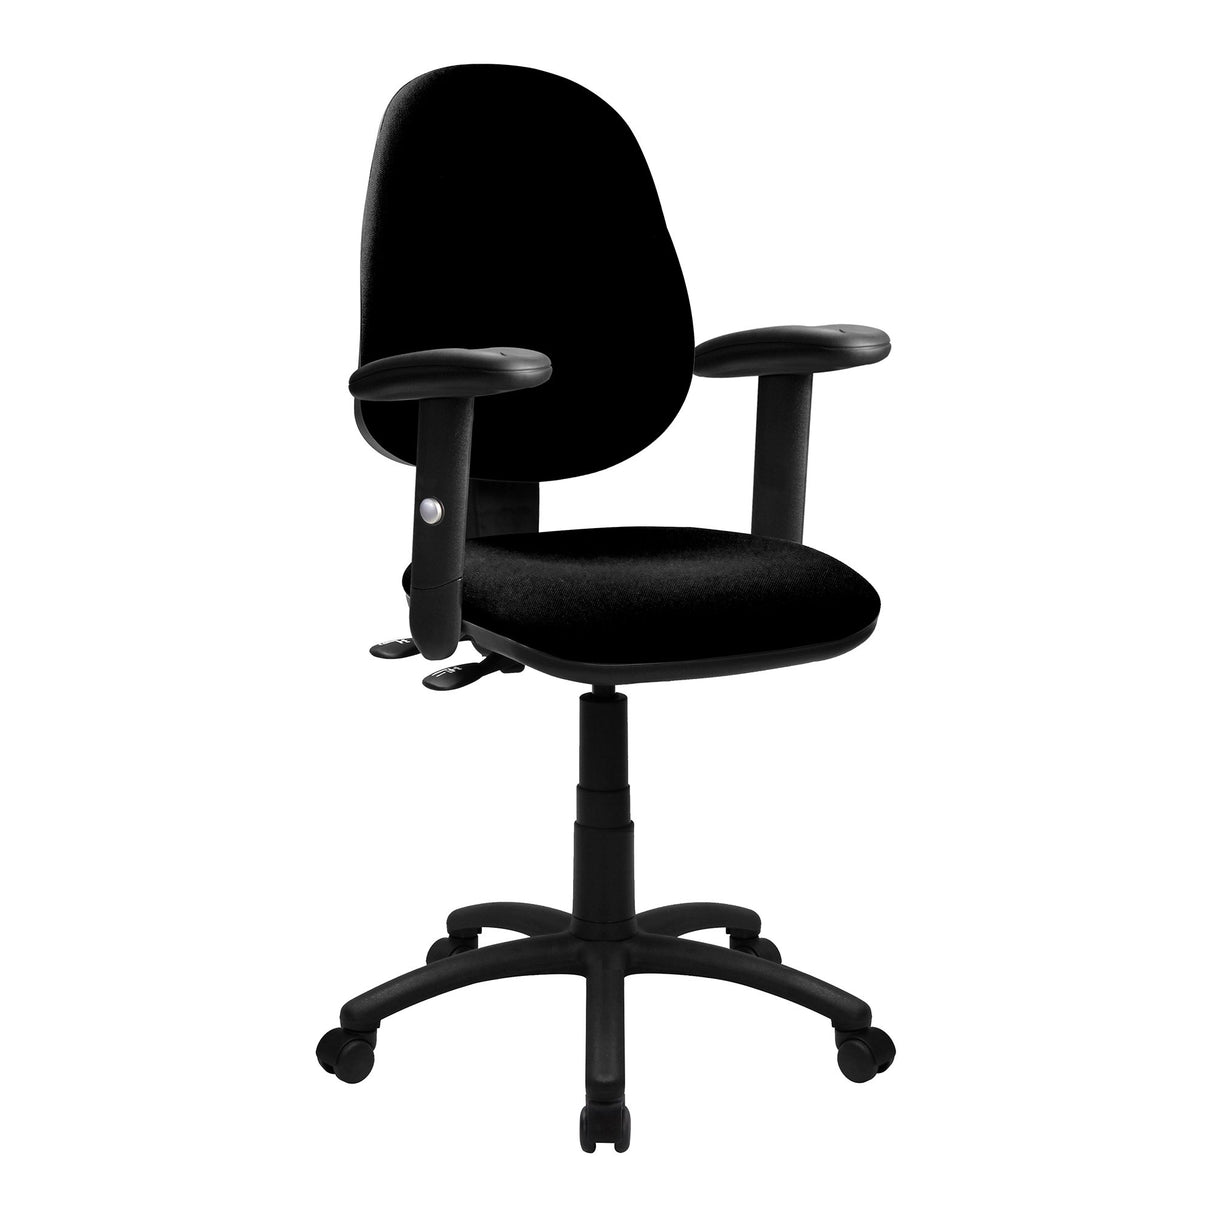 Nautilus Designs Java 200 Medium Back Operator Chair - Twin Lever with Height Adjustable Arms - Black